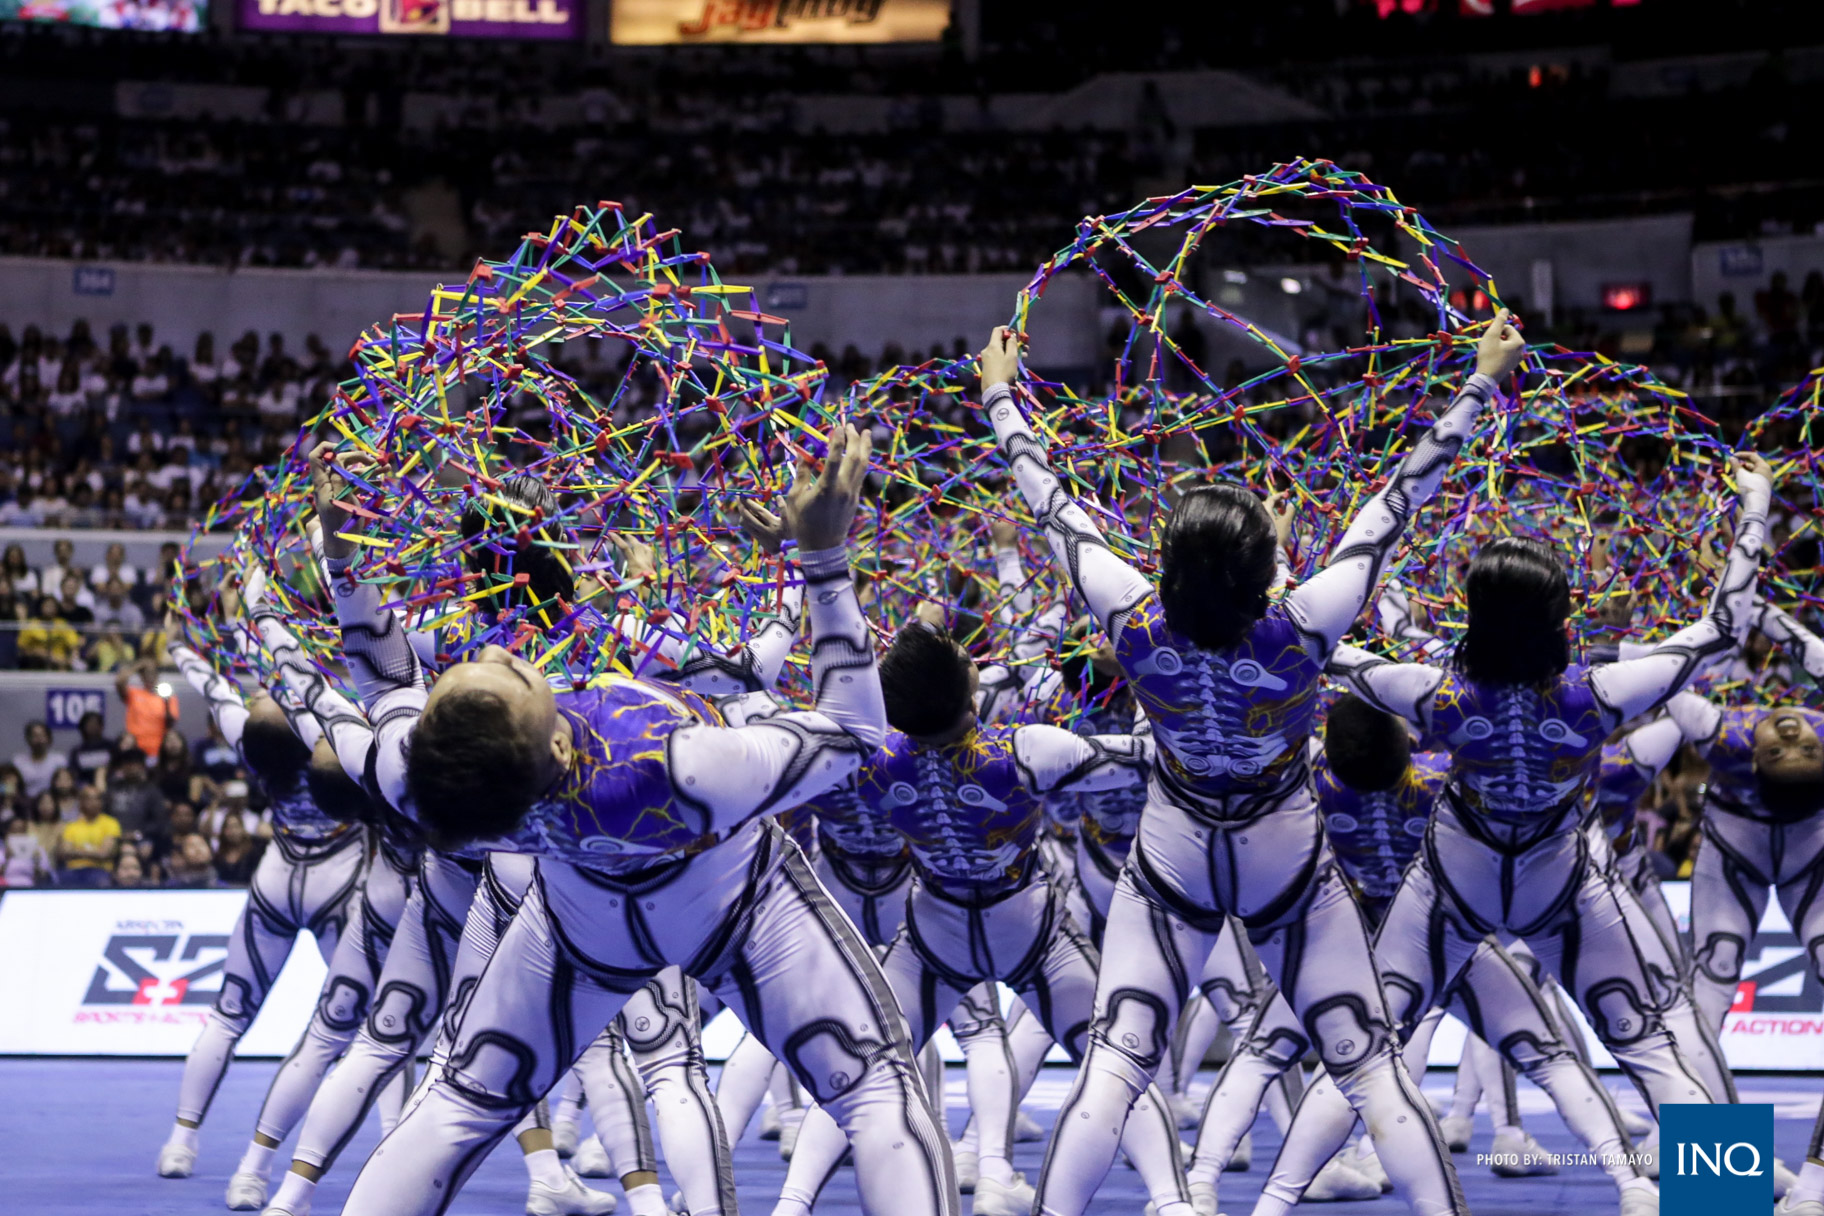 NU Pep Squad with its futuristic theme. Photo by Tristan Tamayo/INQUIRER.net